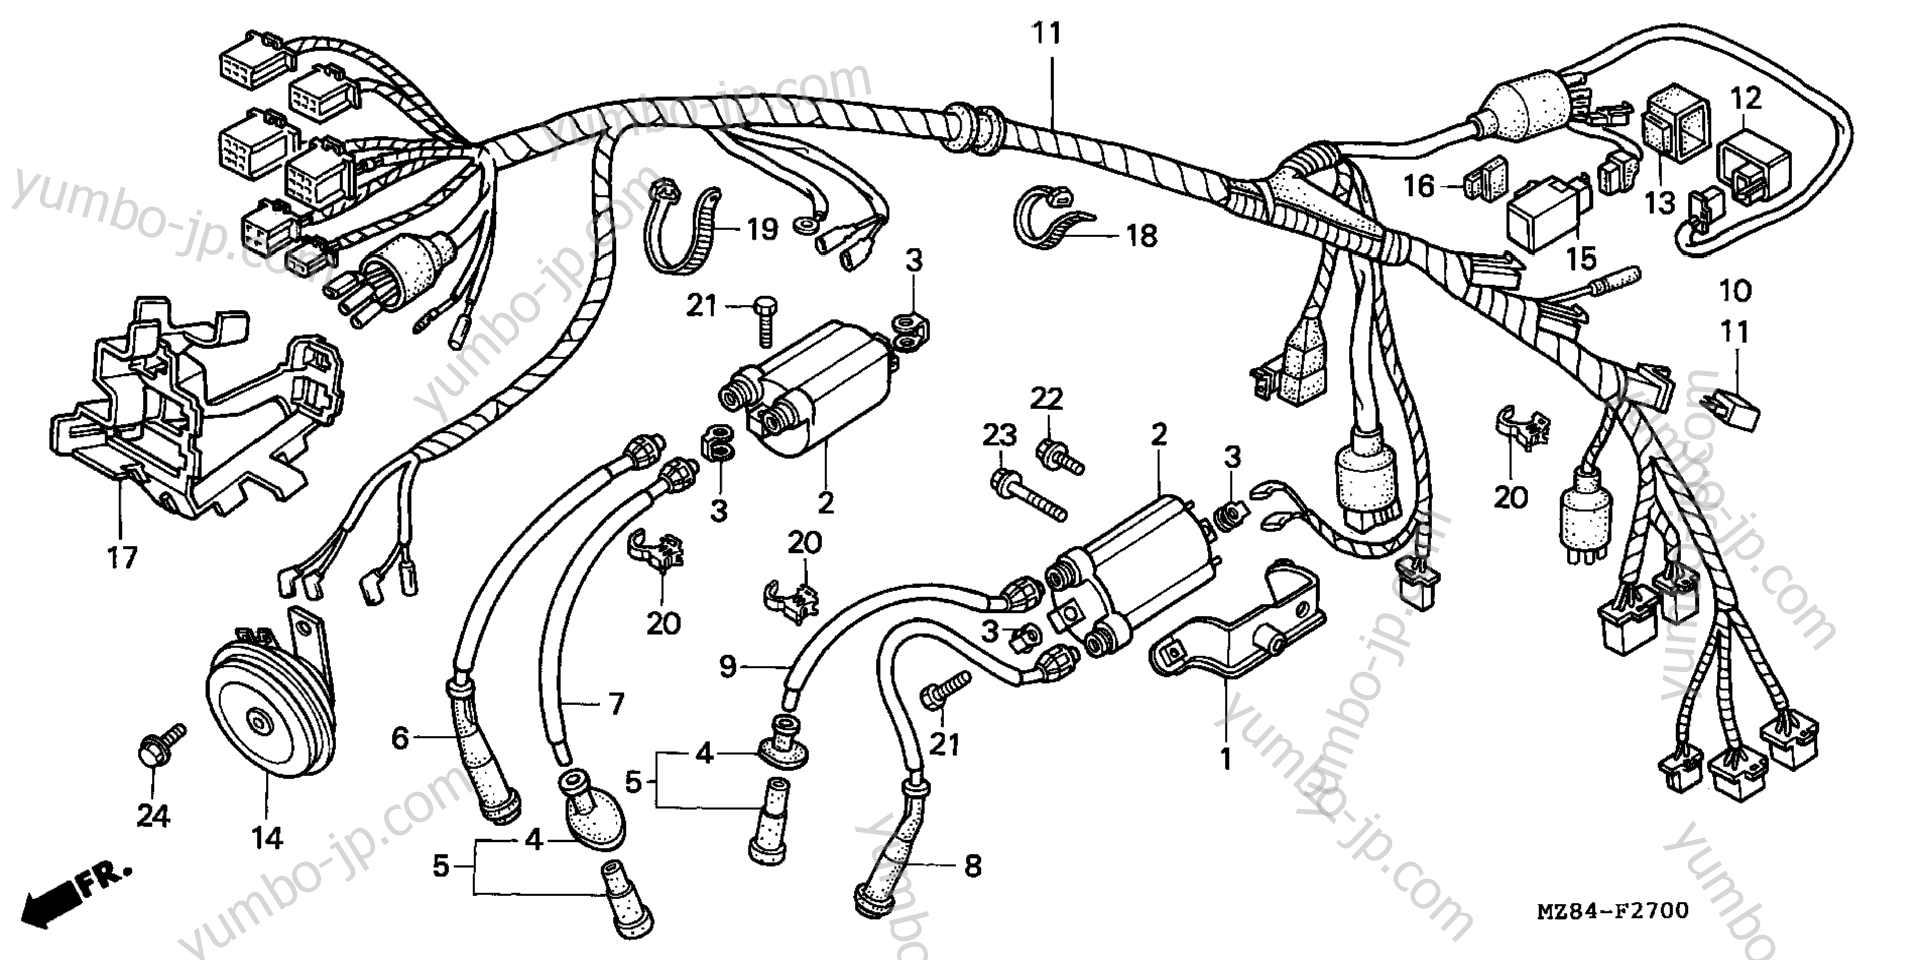 WIRE HARNESS for motorcycles HONDA VT600CD A 1998 year